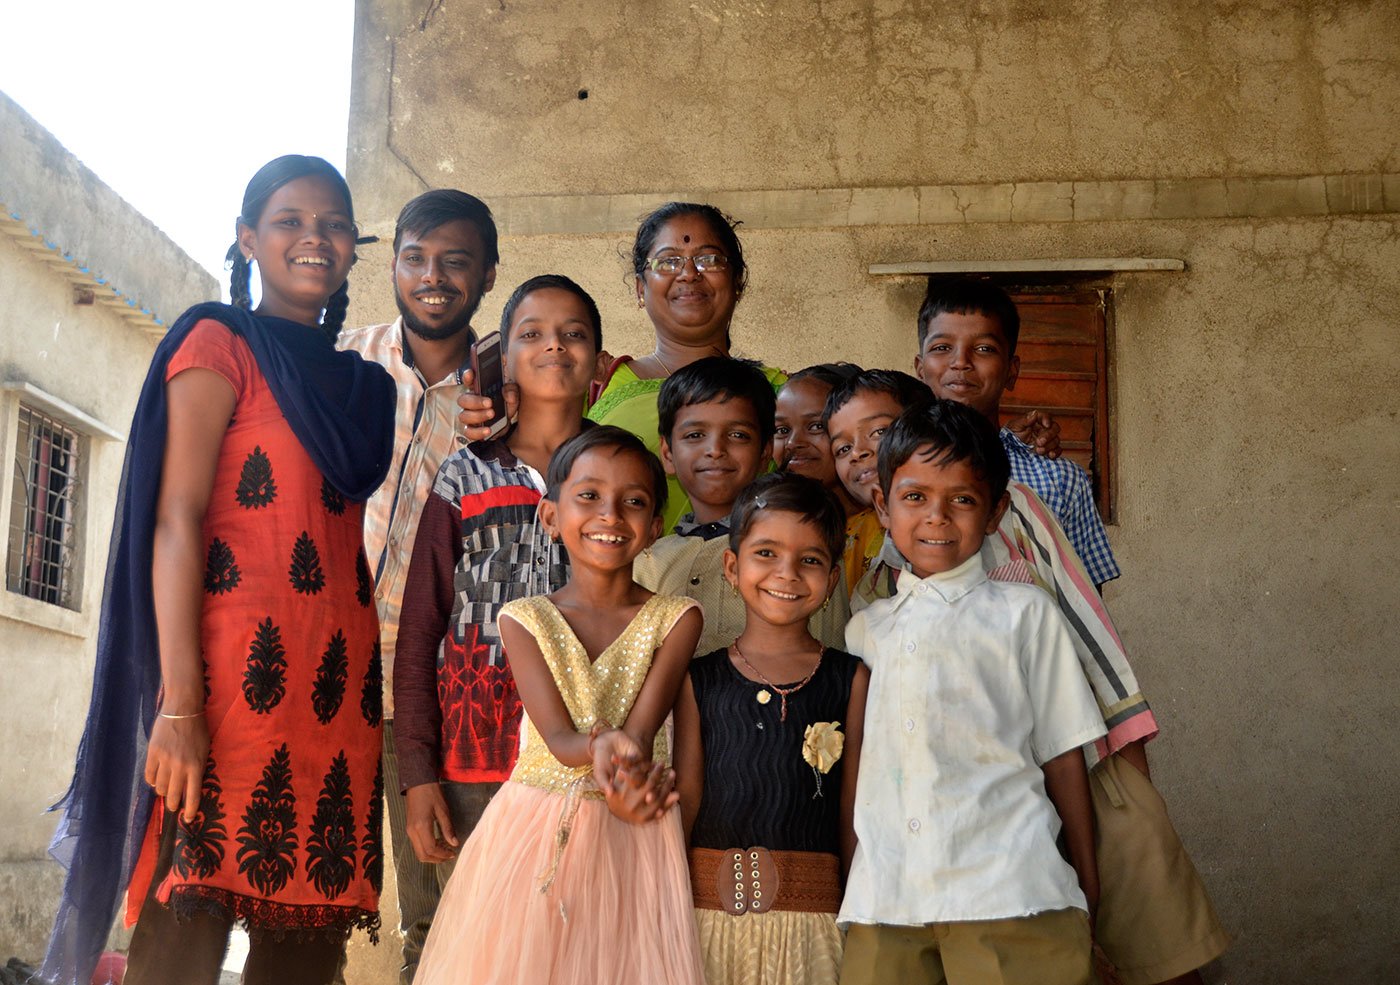 Sunita Bhosale in the Karade village with children from Pardhi community for whose education she works 